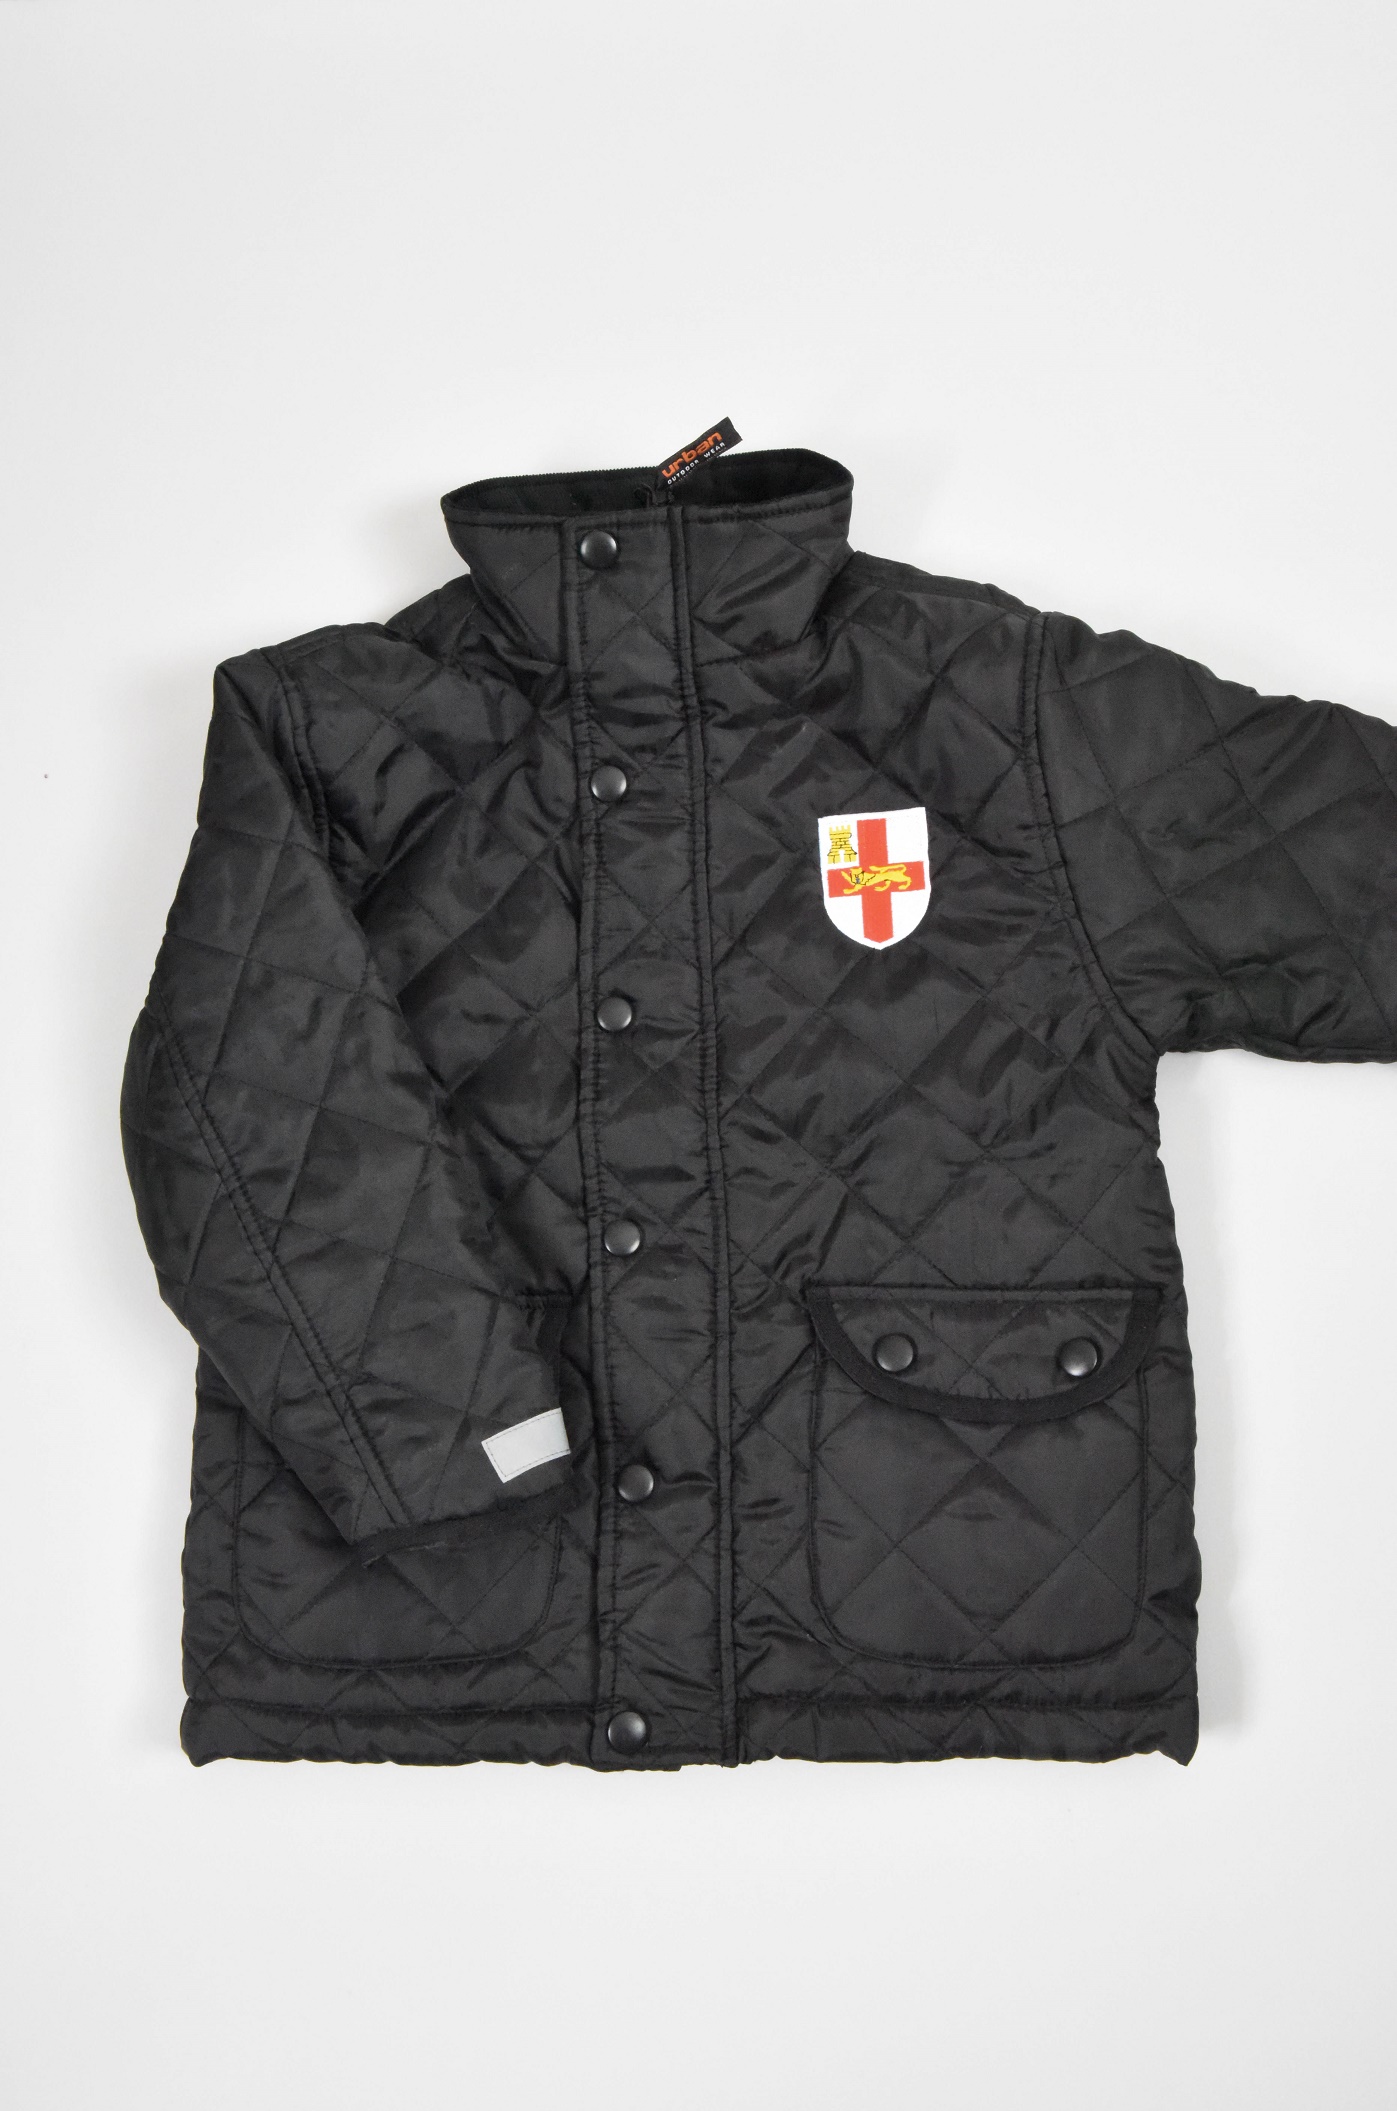 Boys Black Quilted Jacket with Badge - Age 11-12